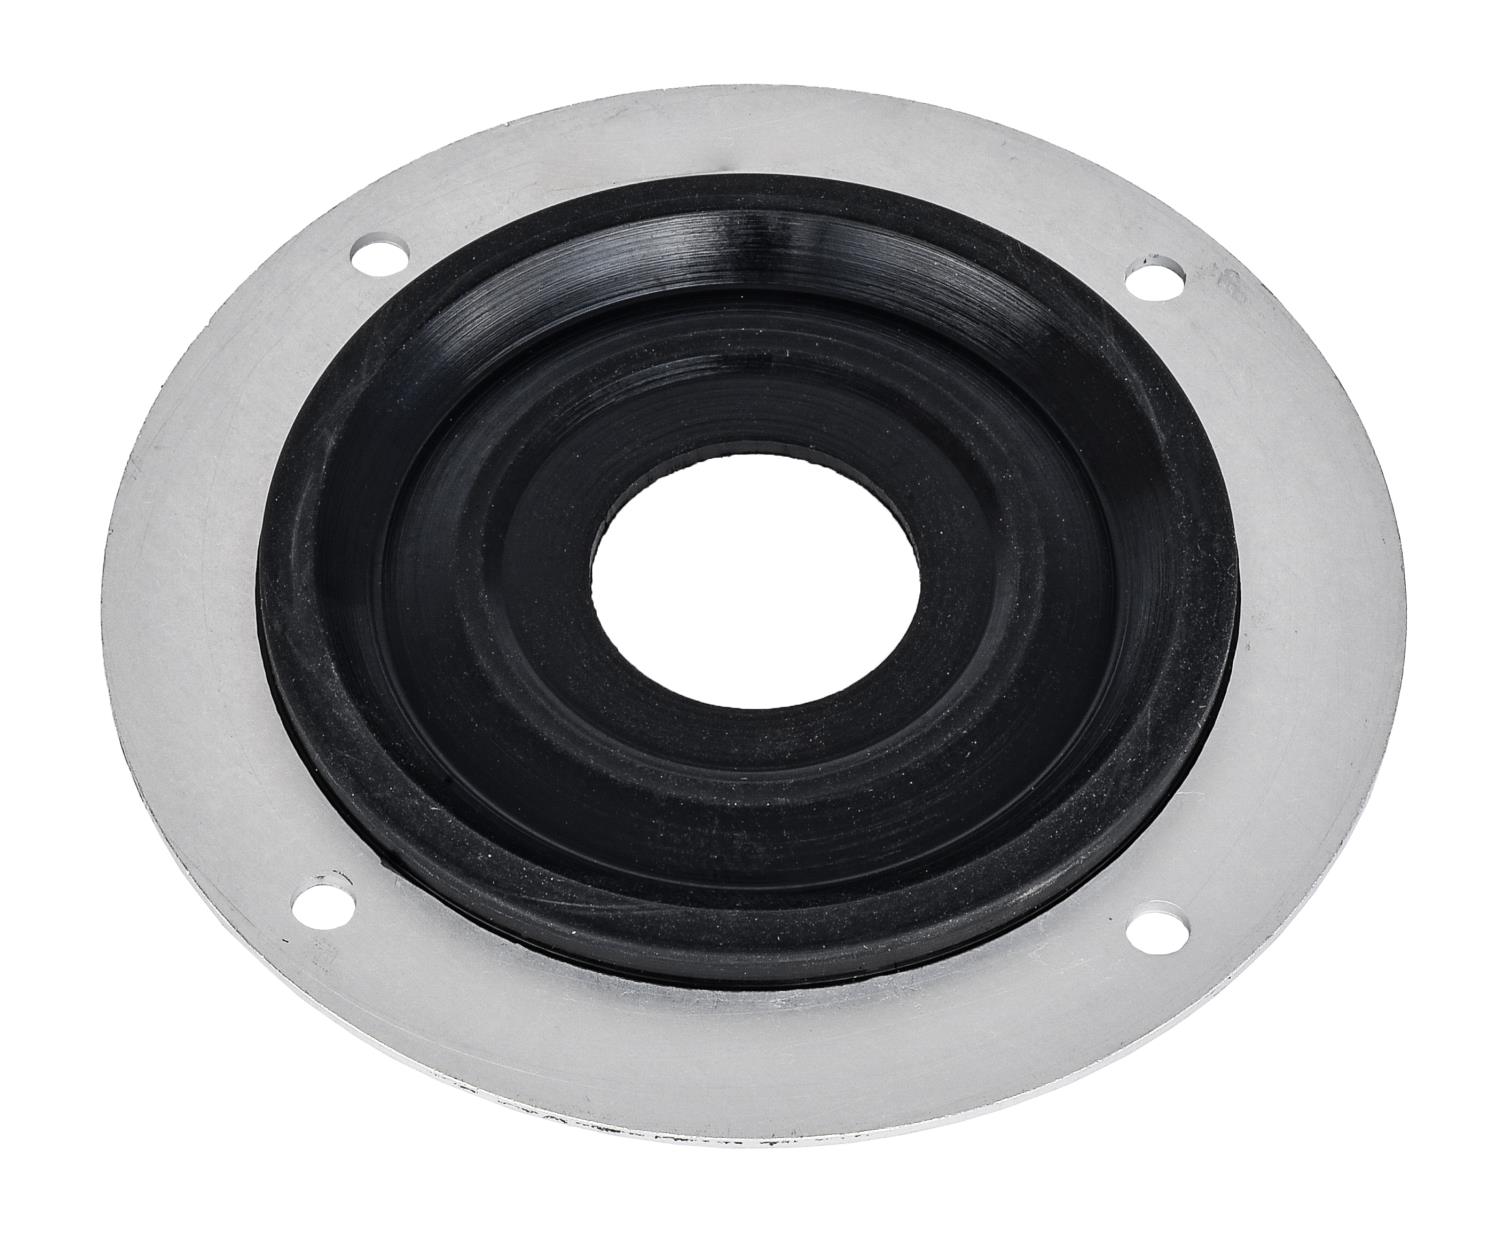 Firewall Grommet Seal, 1-Piece Flat Style [.750 in. I.D. Hole]